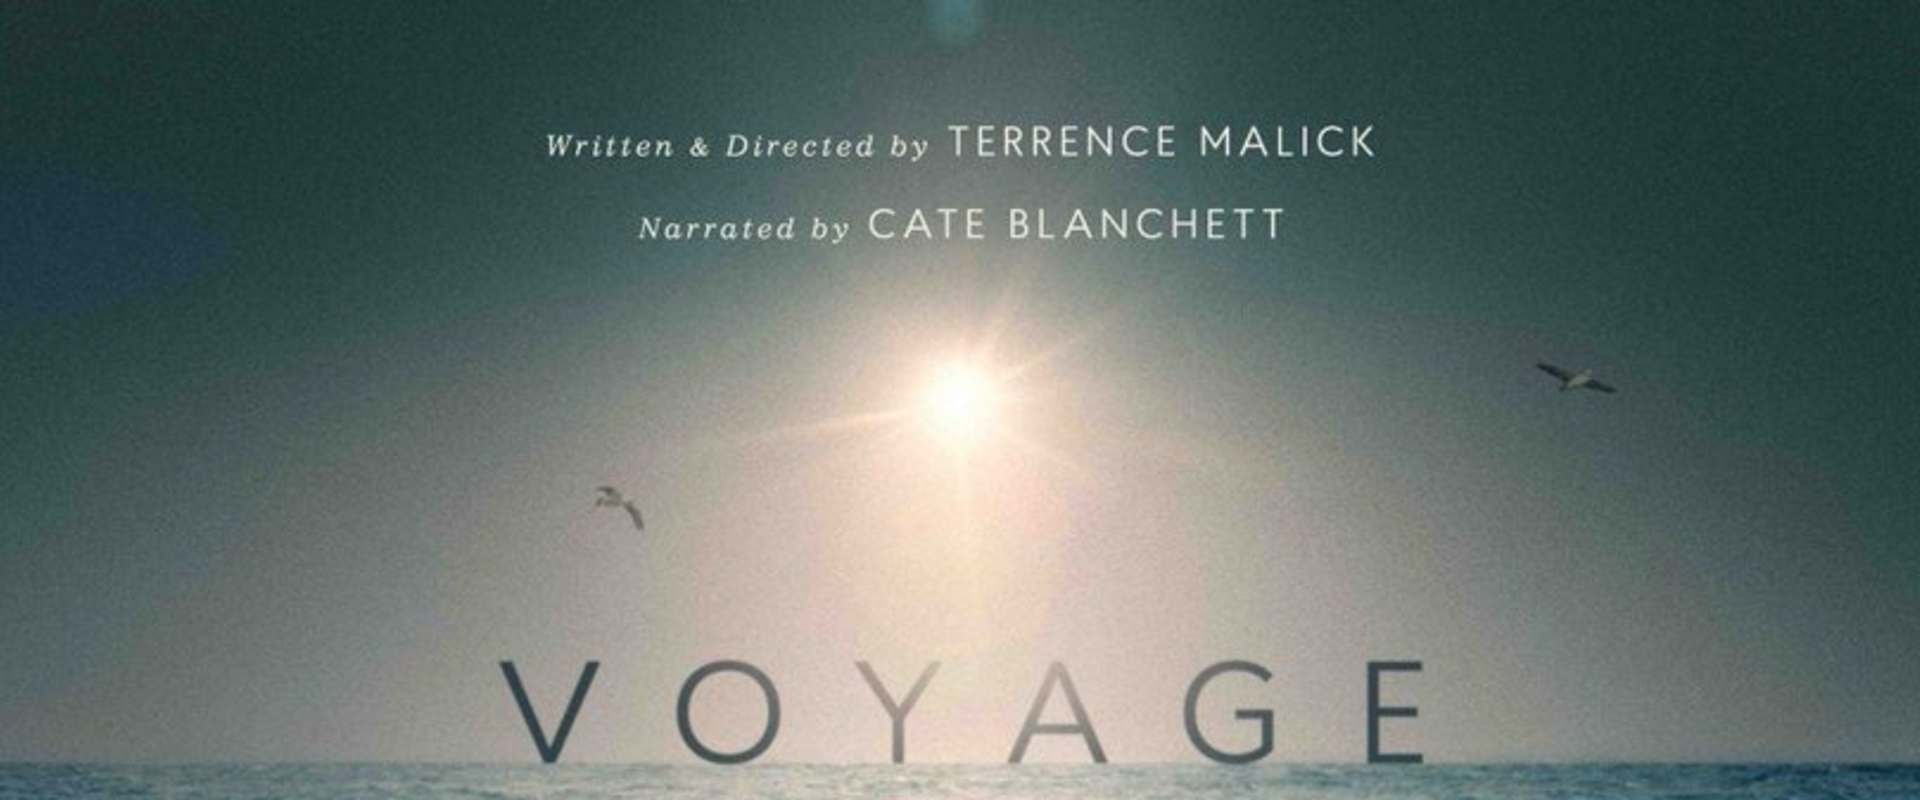 Voyage of Time: Life's Journey background 2